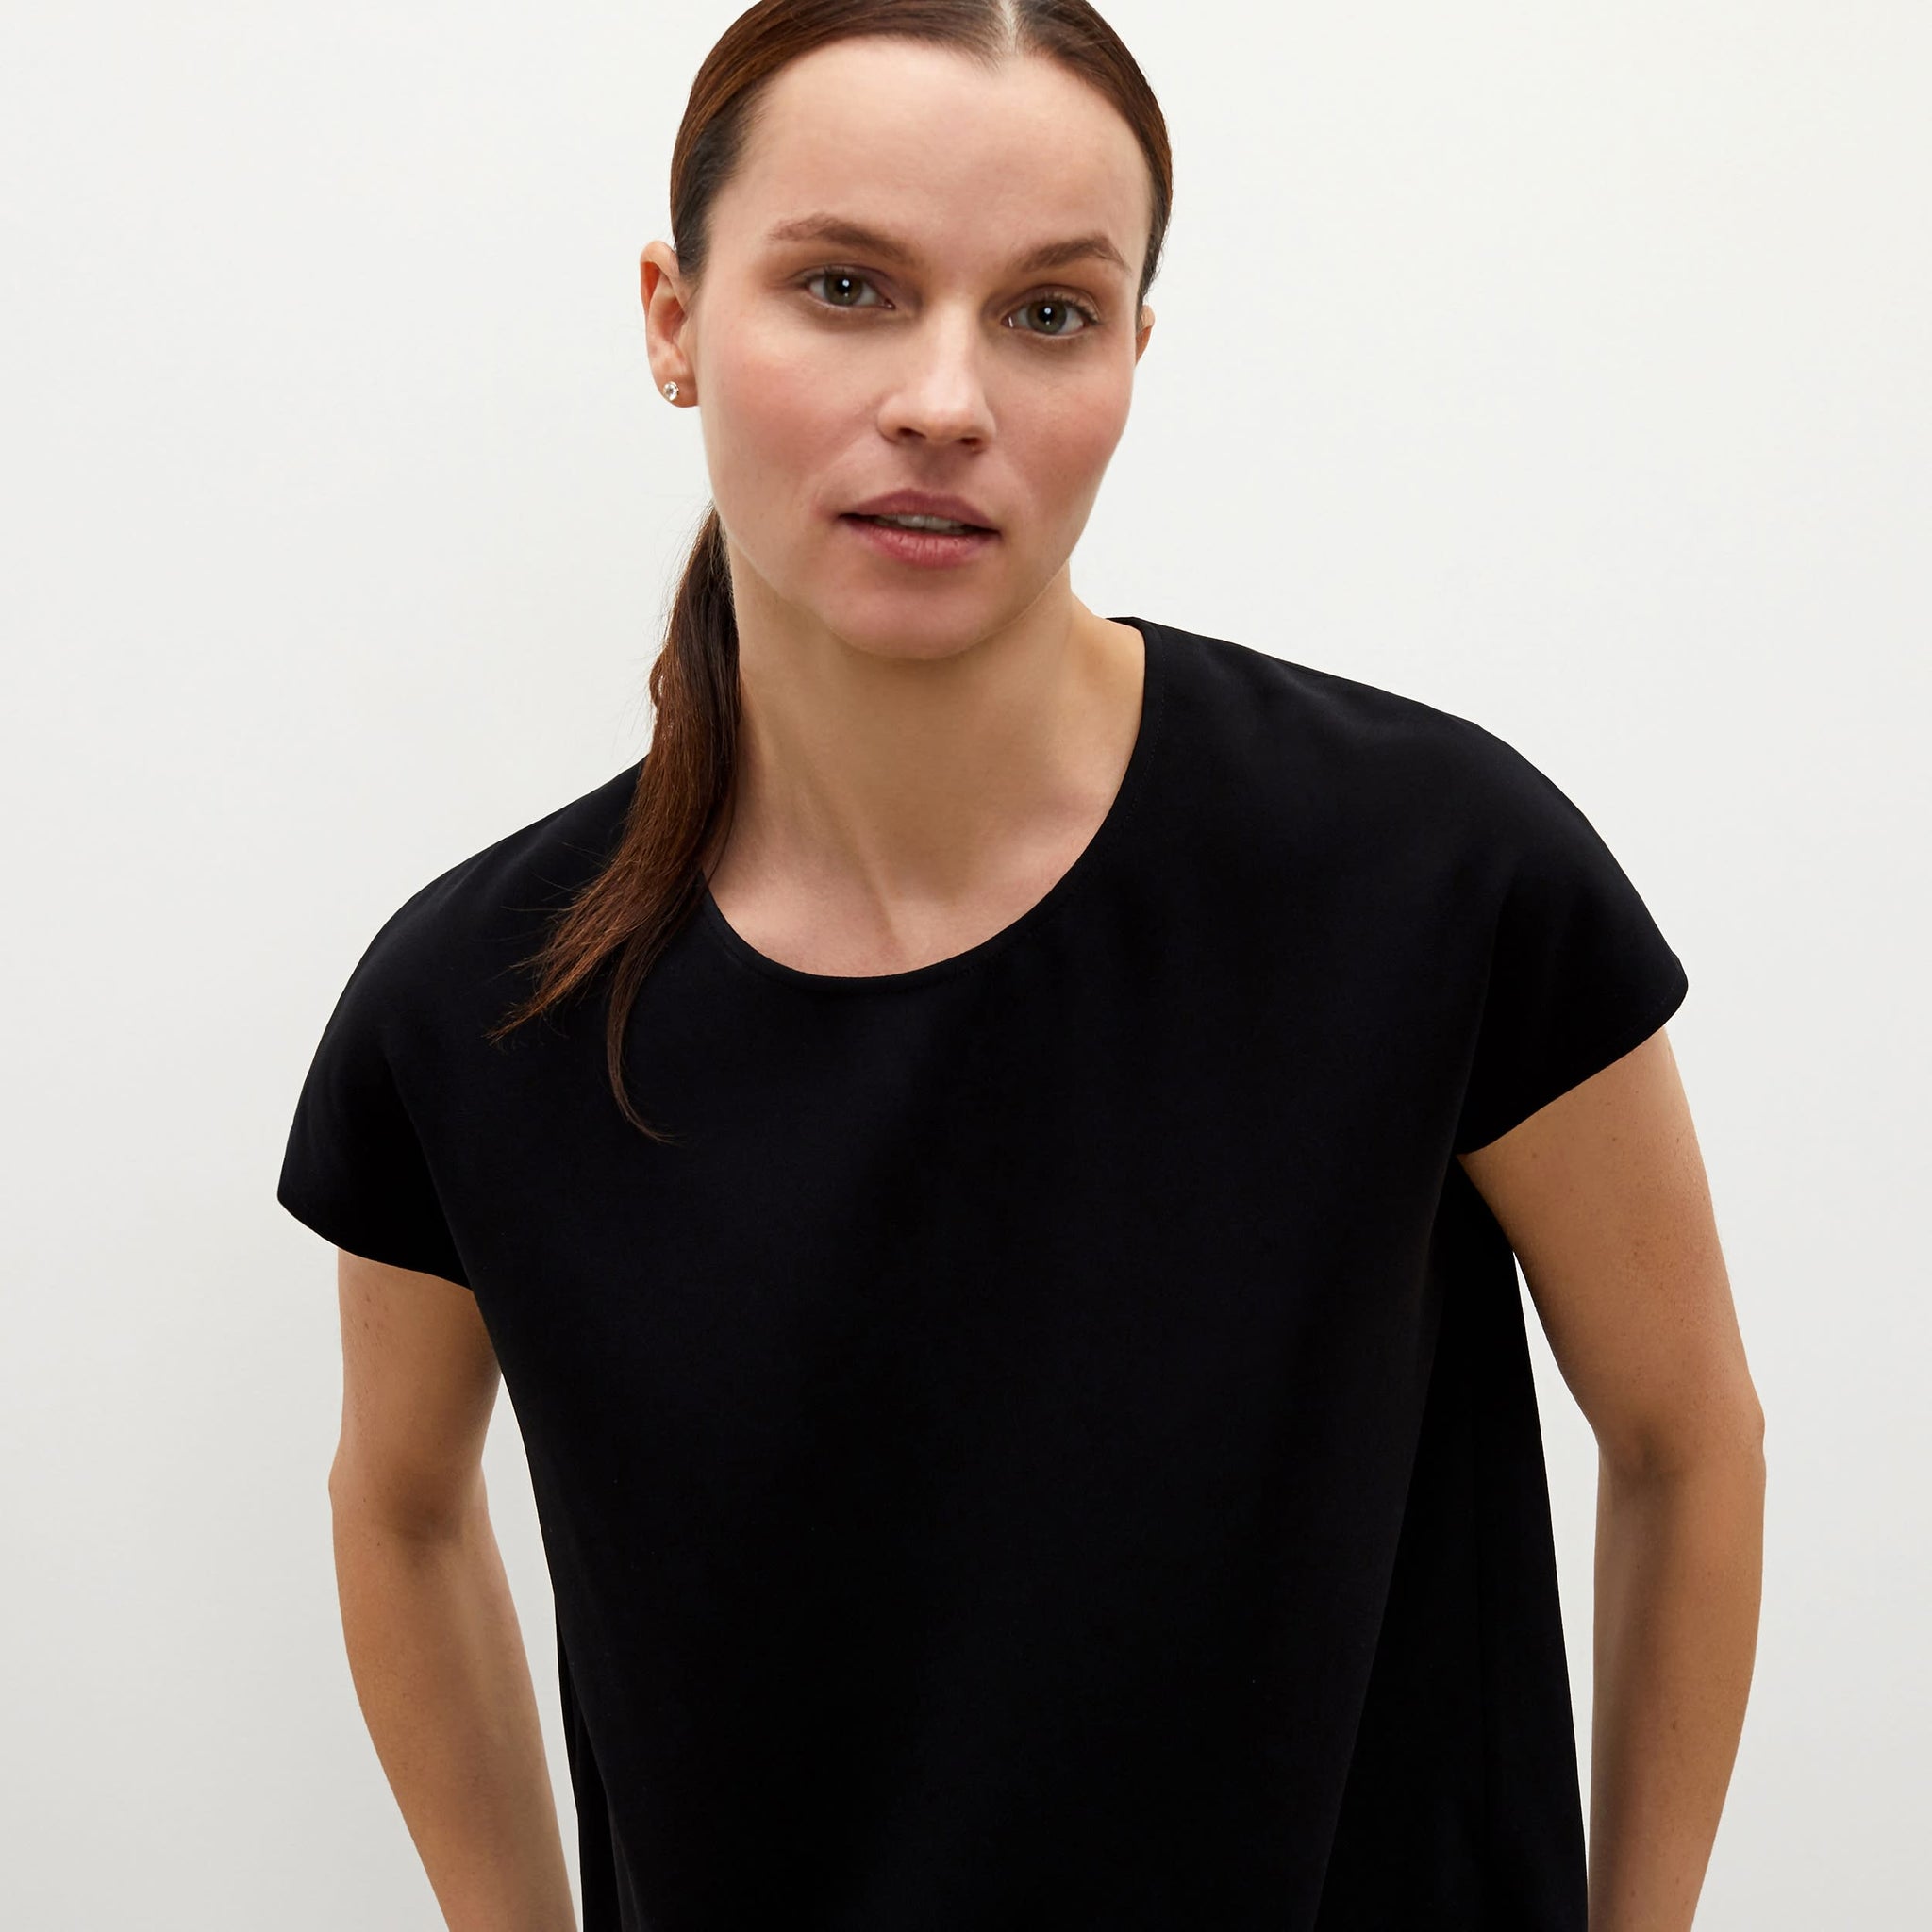 Detail image of a woman standing wearing the Didion top in black